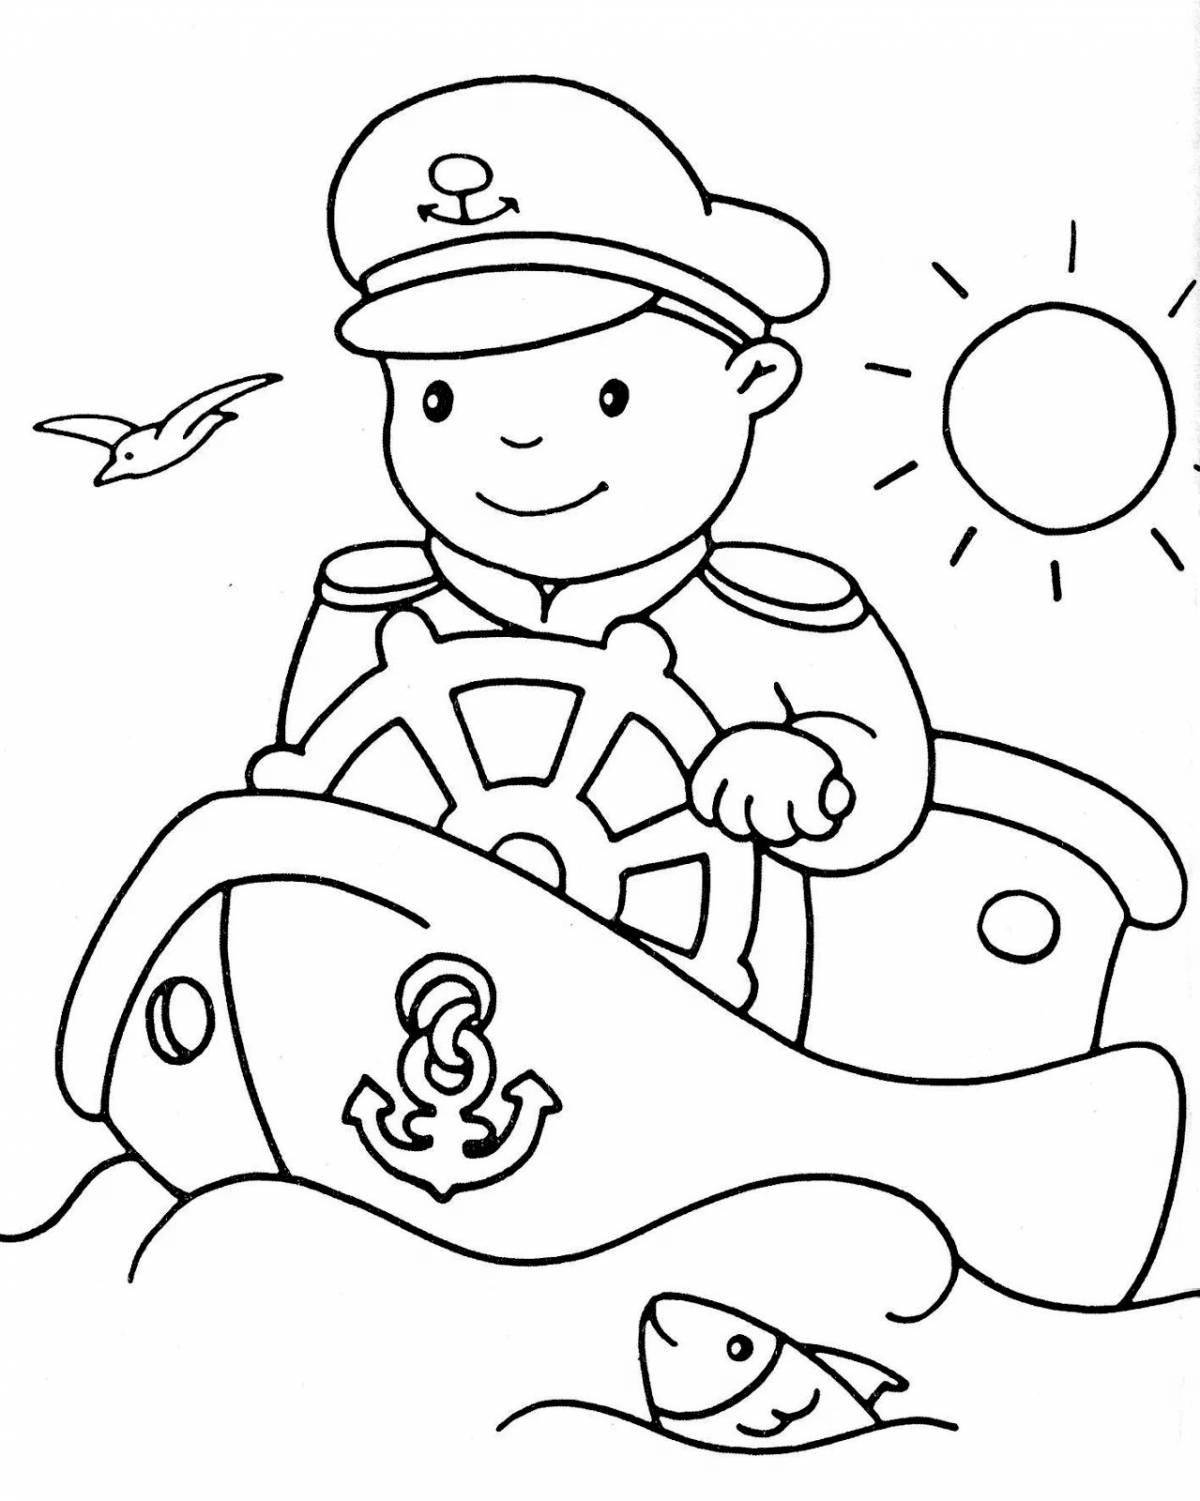 Fun military coloring book for 4-5 year olds